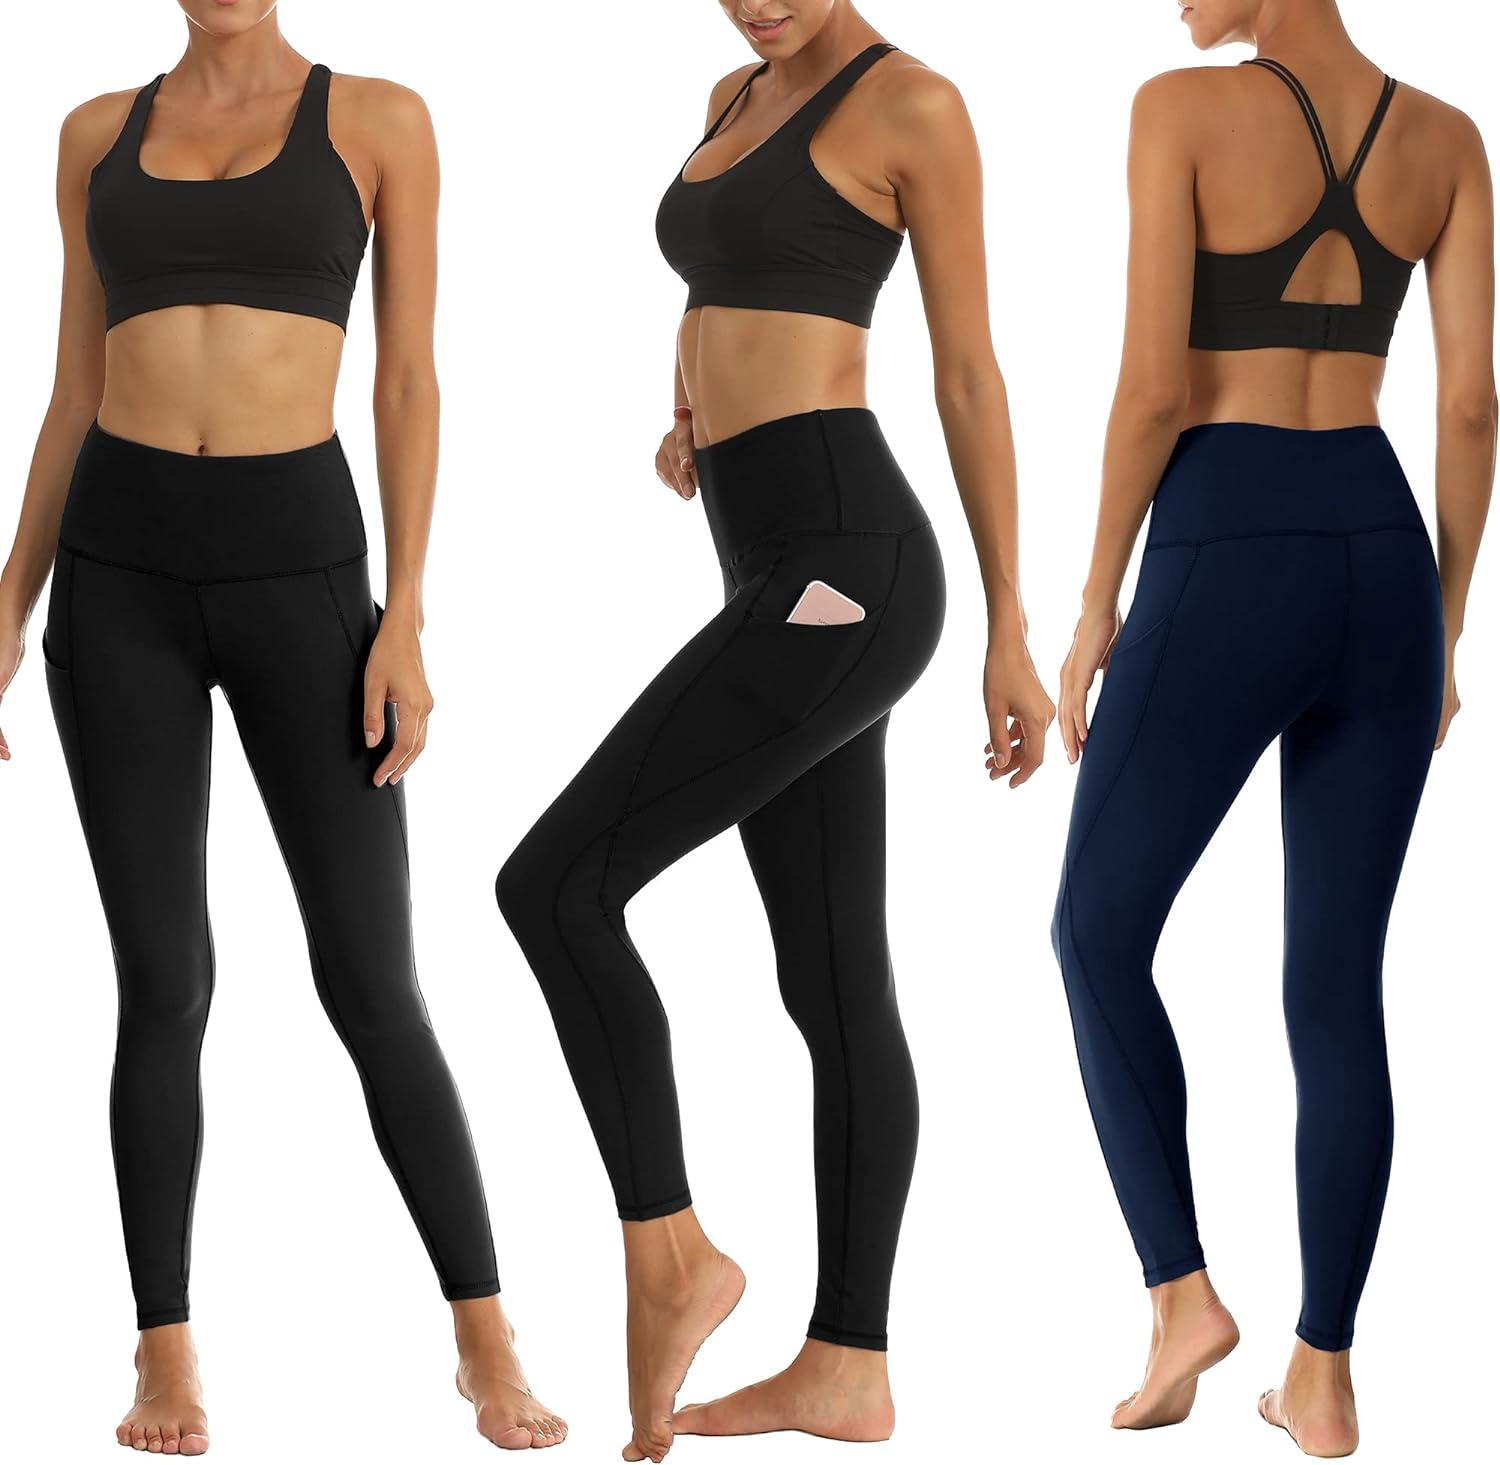 GAYHAY 3 Pack Leggings with Pockets for Women - High Waisted Tummy Control  Workout Yoga Pants Compression Black Leggings